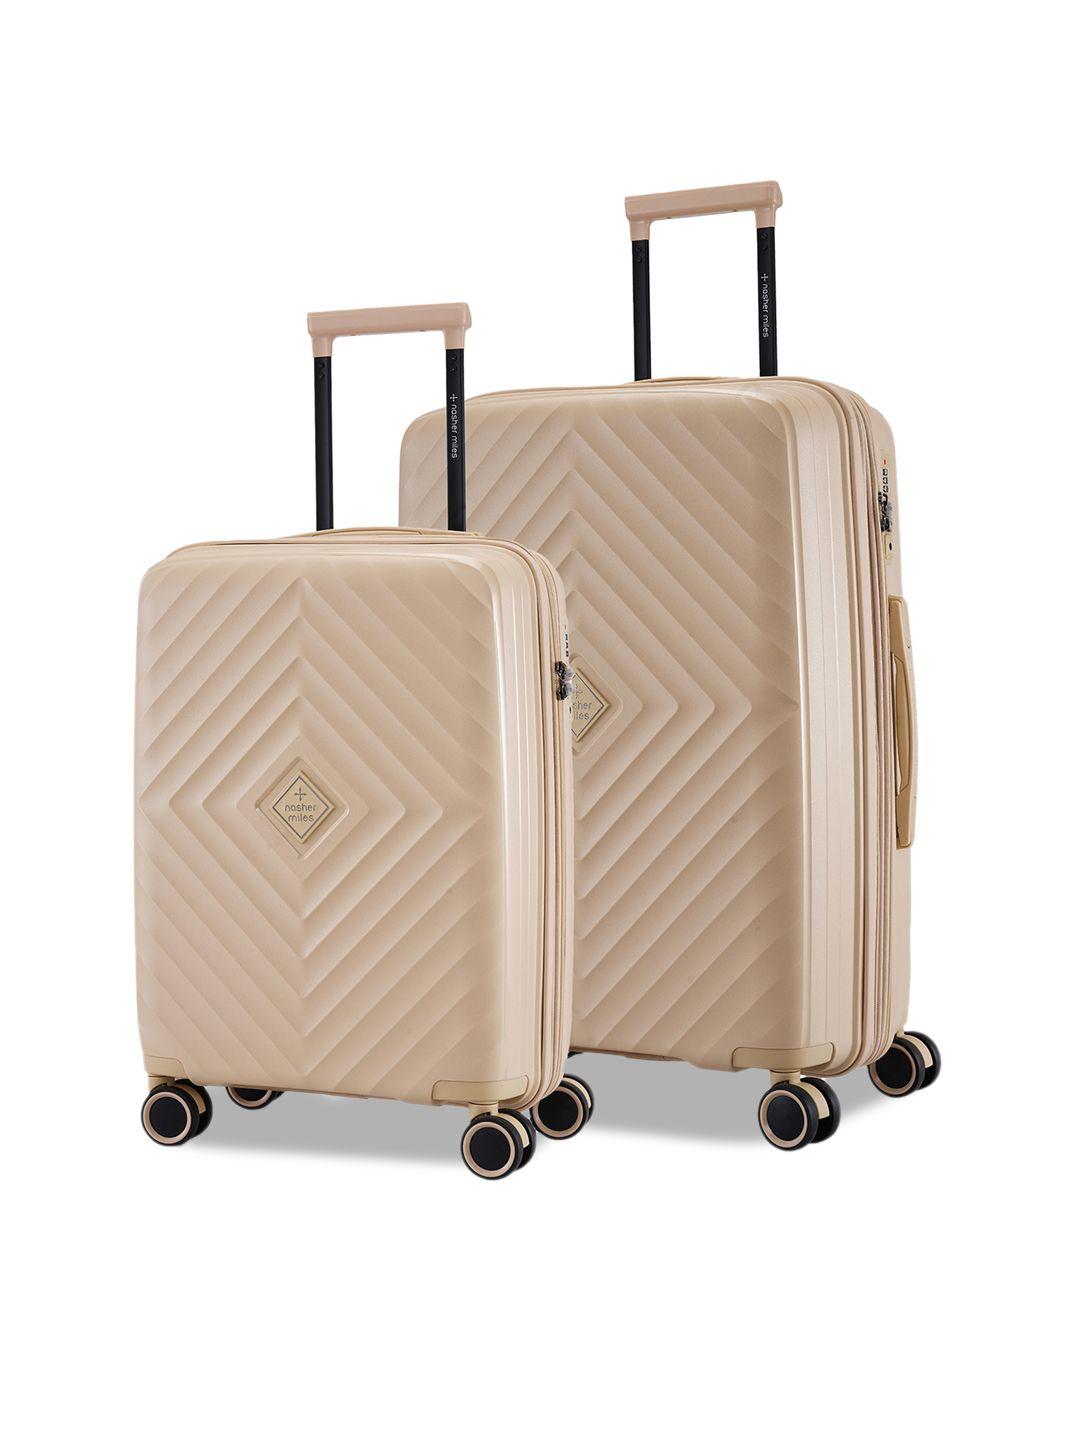 nasher miles set of 2 hard-sided textured trolley suitcases